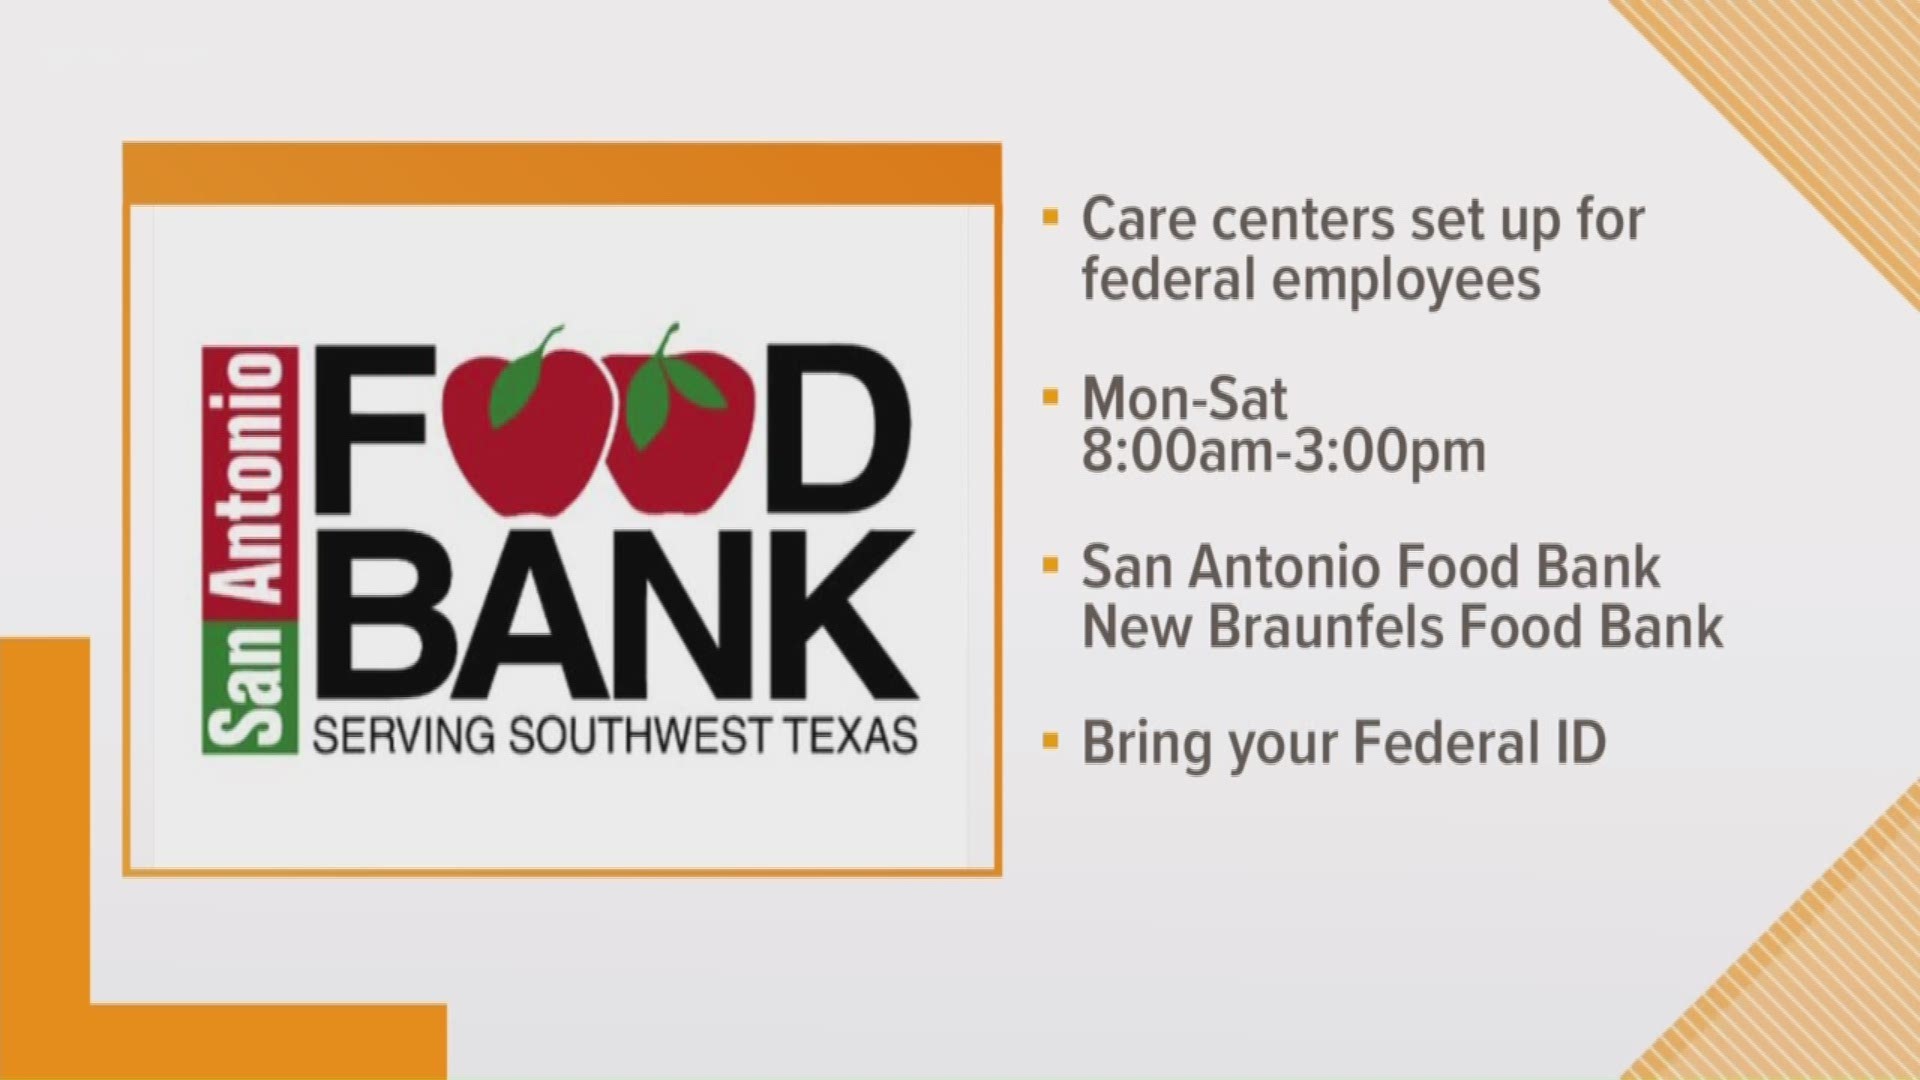 Care centers are set up at the facilities in San Antonio and New Braunfels food bank specifically for employees that are furloughed or working without pay. The care packages of food are available Monday through Saturday from 8:00 a.m. until 3:00 p.m.